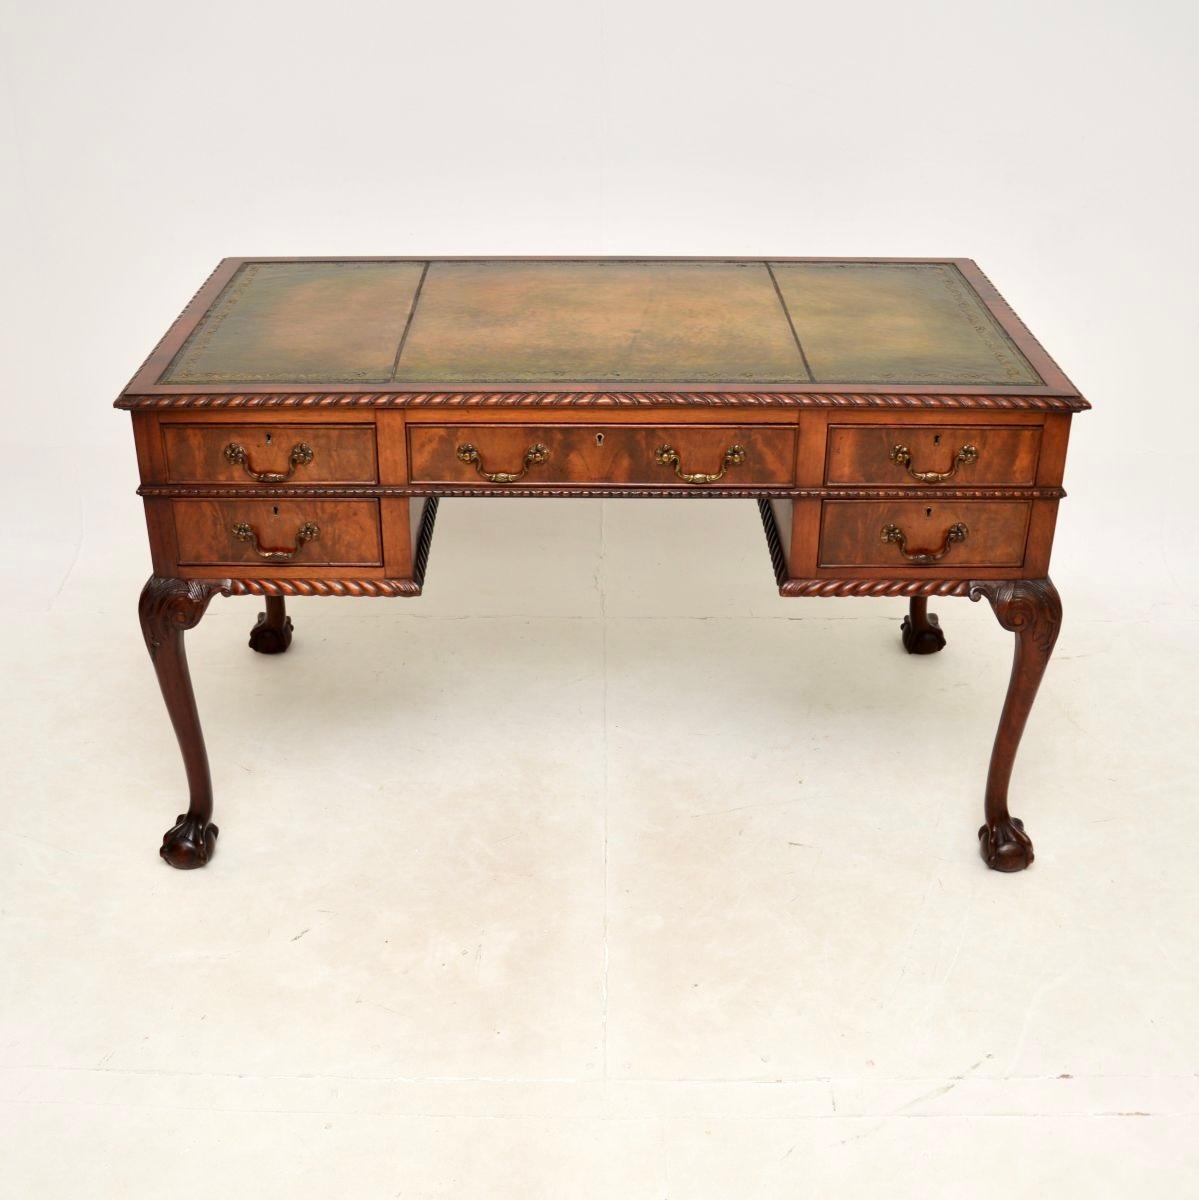 A fantastic antique Chippendale style leather top desk in the Chippendale style. This was made in England, it dates from around the 1890-1910 period.

It is very well made, sitting on beautiful cabriole legs with acanthus leaf carving at the knees,